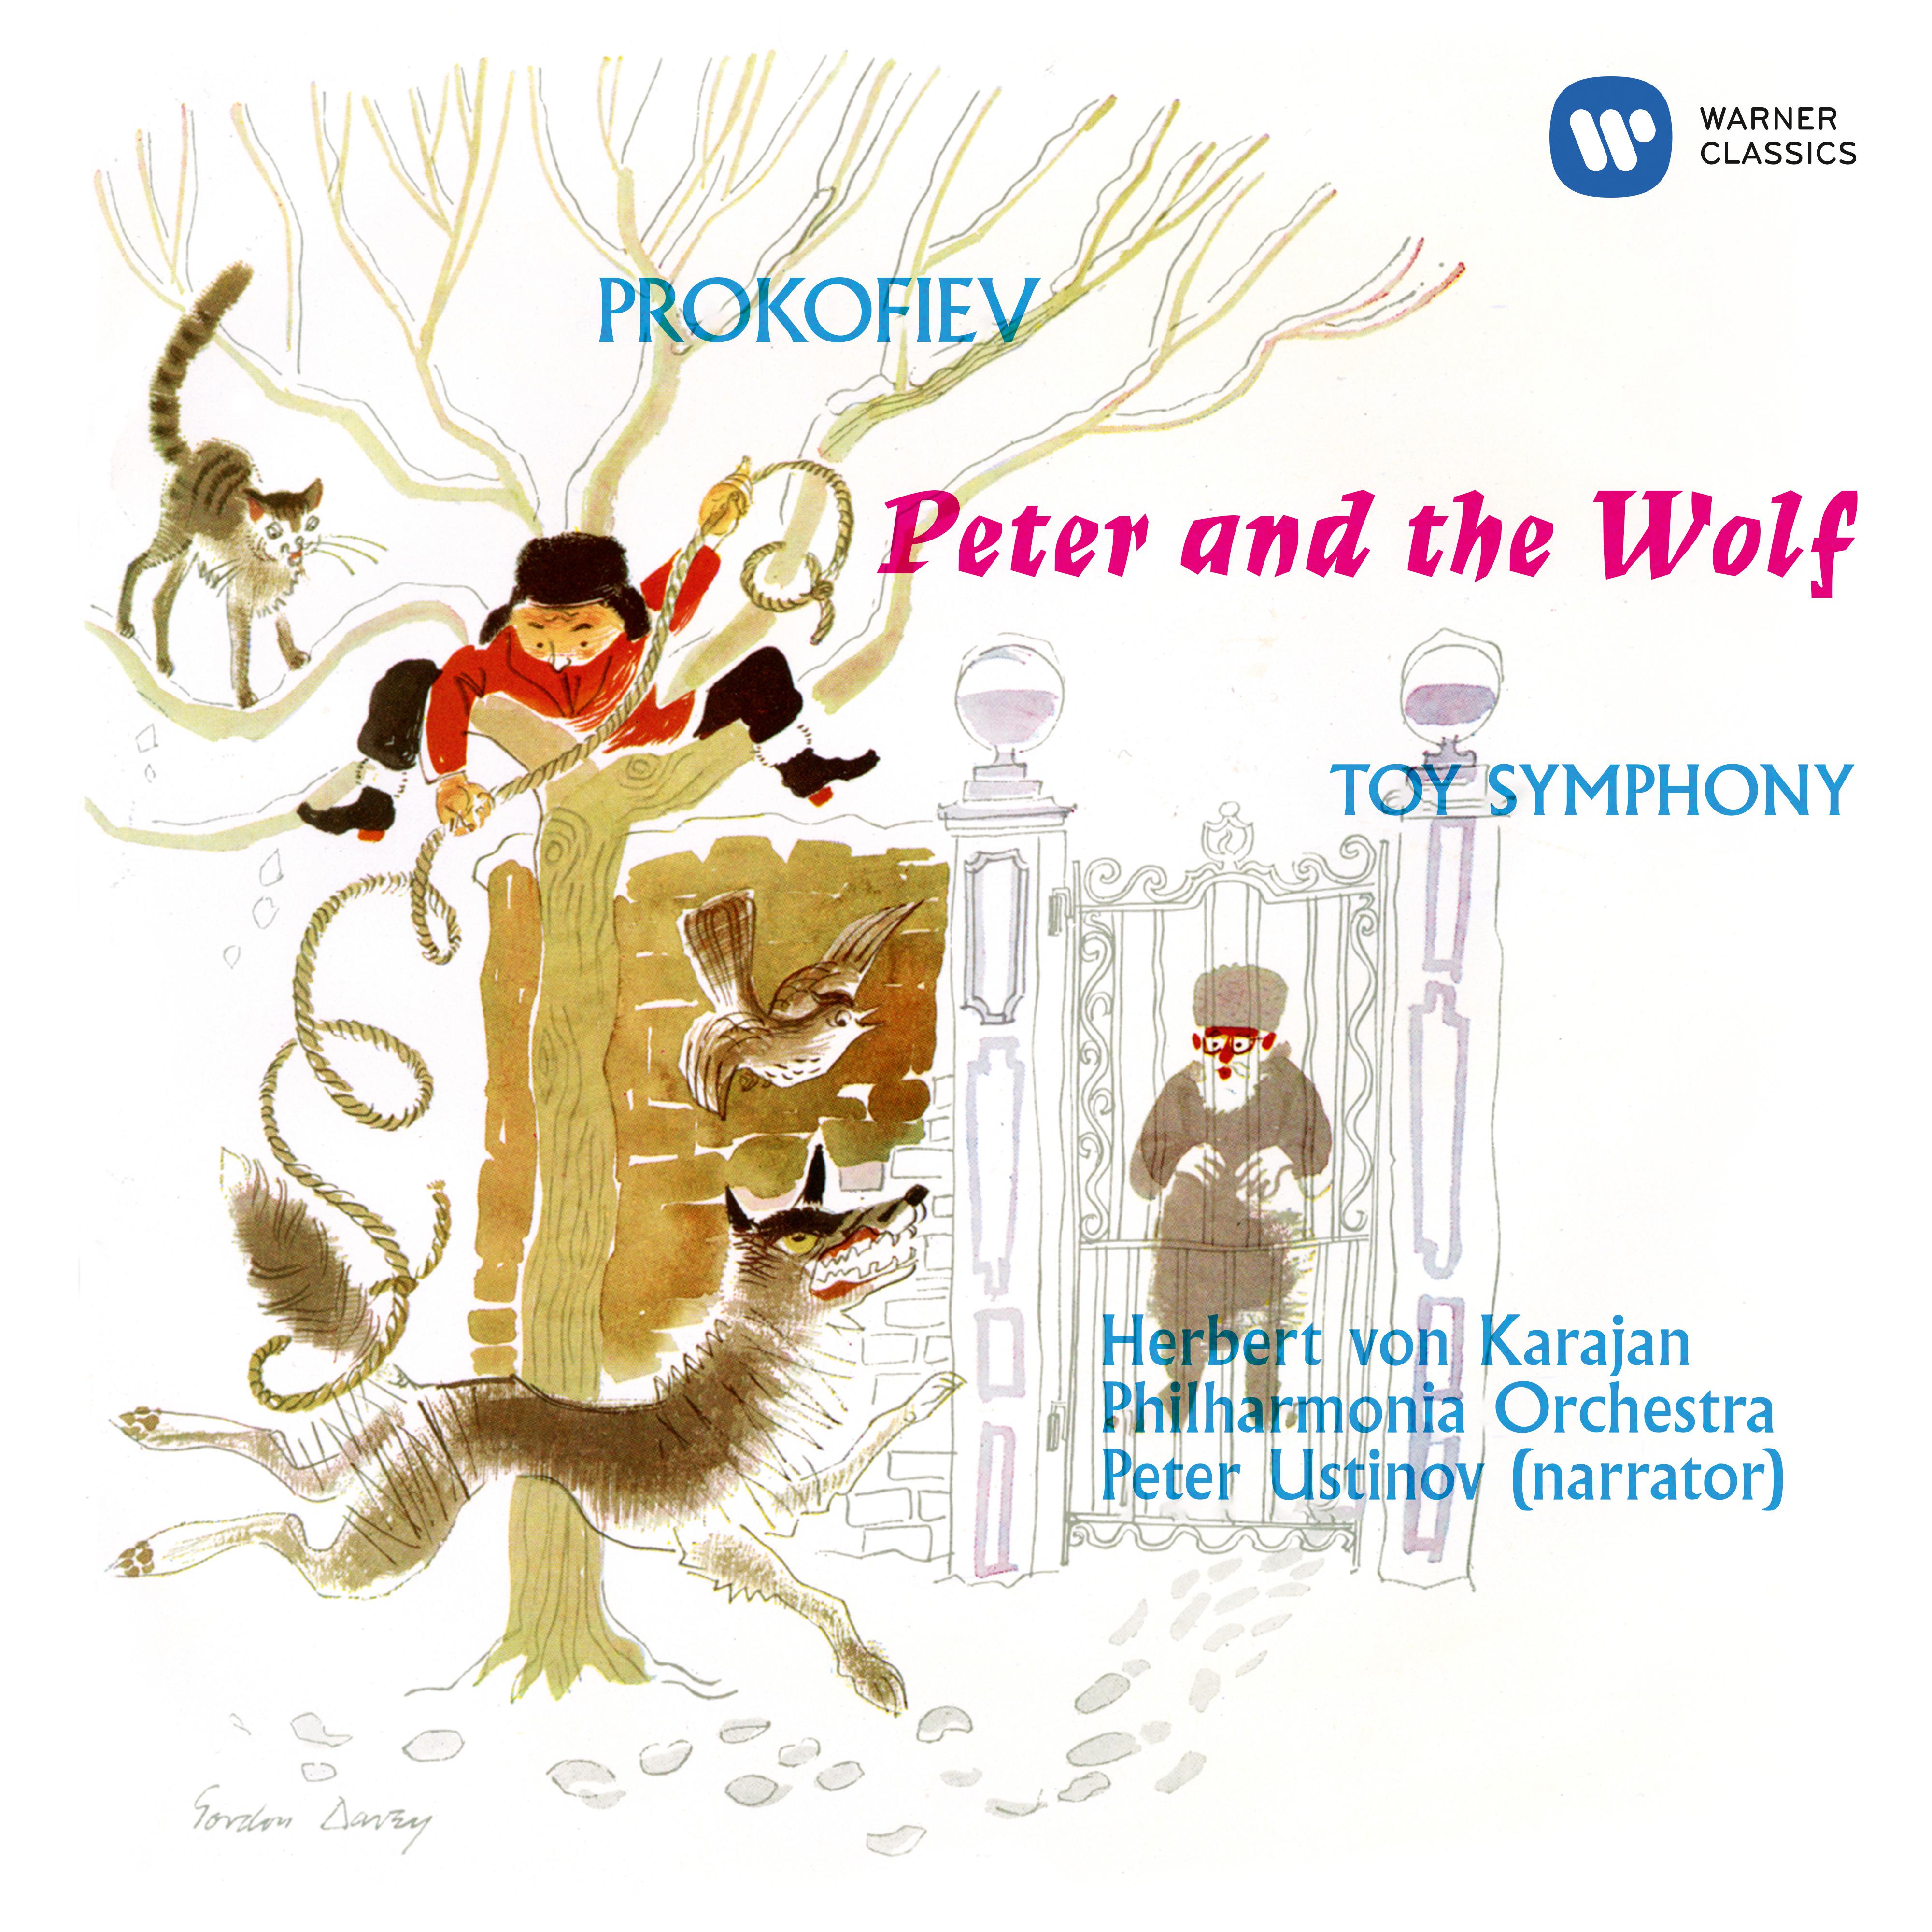 Peter and the Wolf, Op. 67:No Sooner Had Peter Gone...